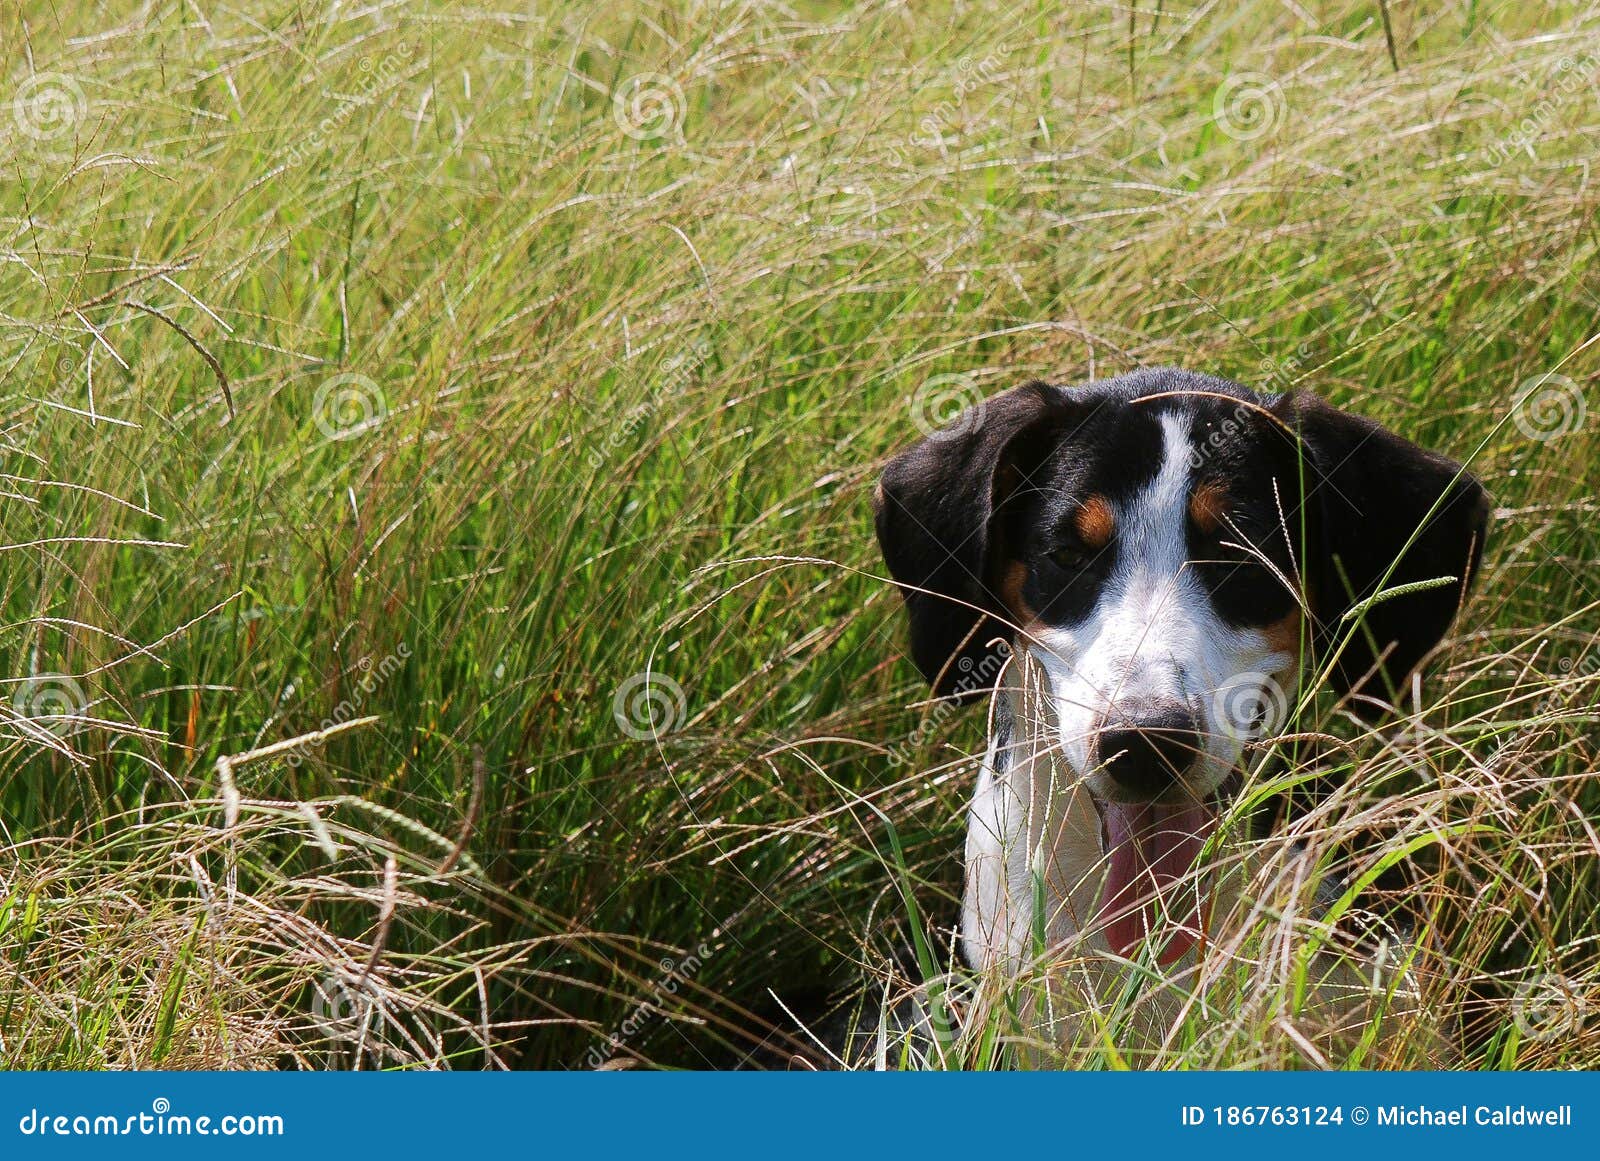 Treeing Walker Coonhound Waving In The Tall Grass Stock Photo Image Of Grass Waving 186763124